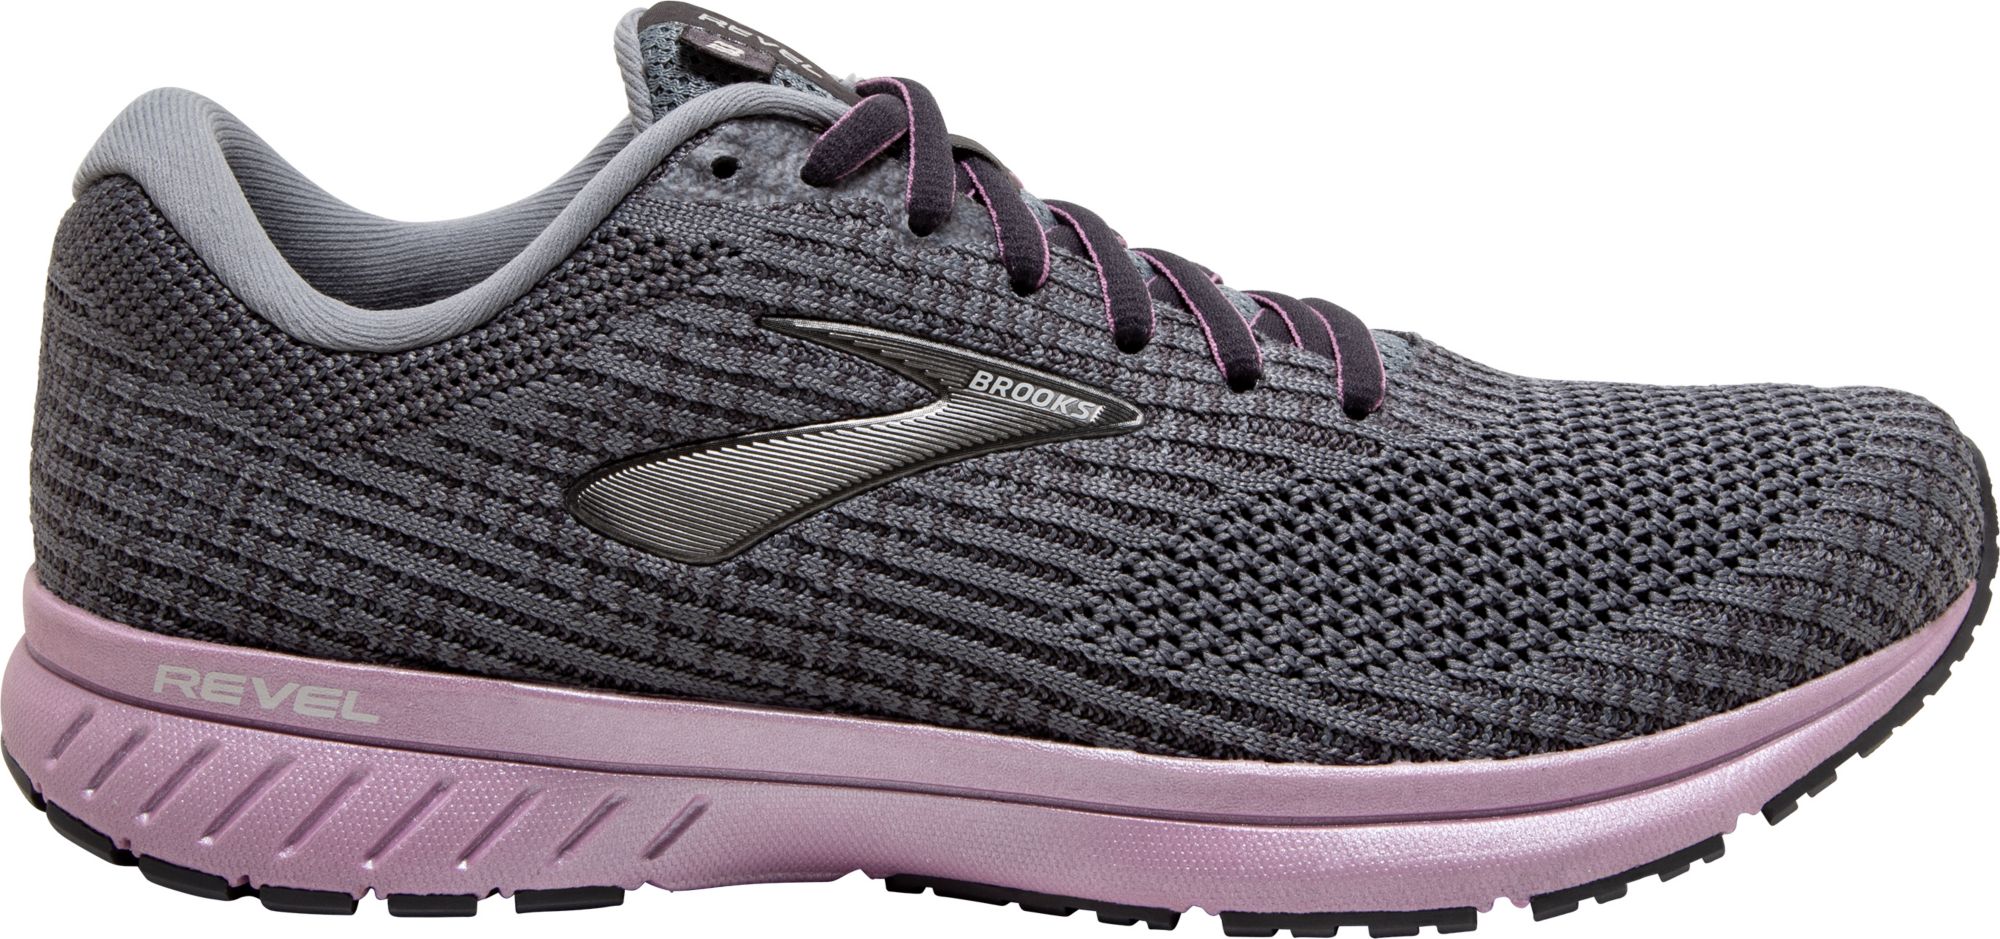 Brooks Running Shoes for Women | Best Price Guarantee at DICK'S